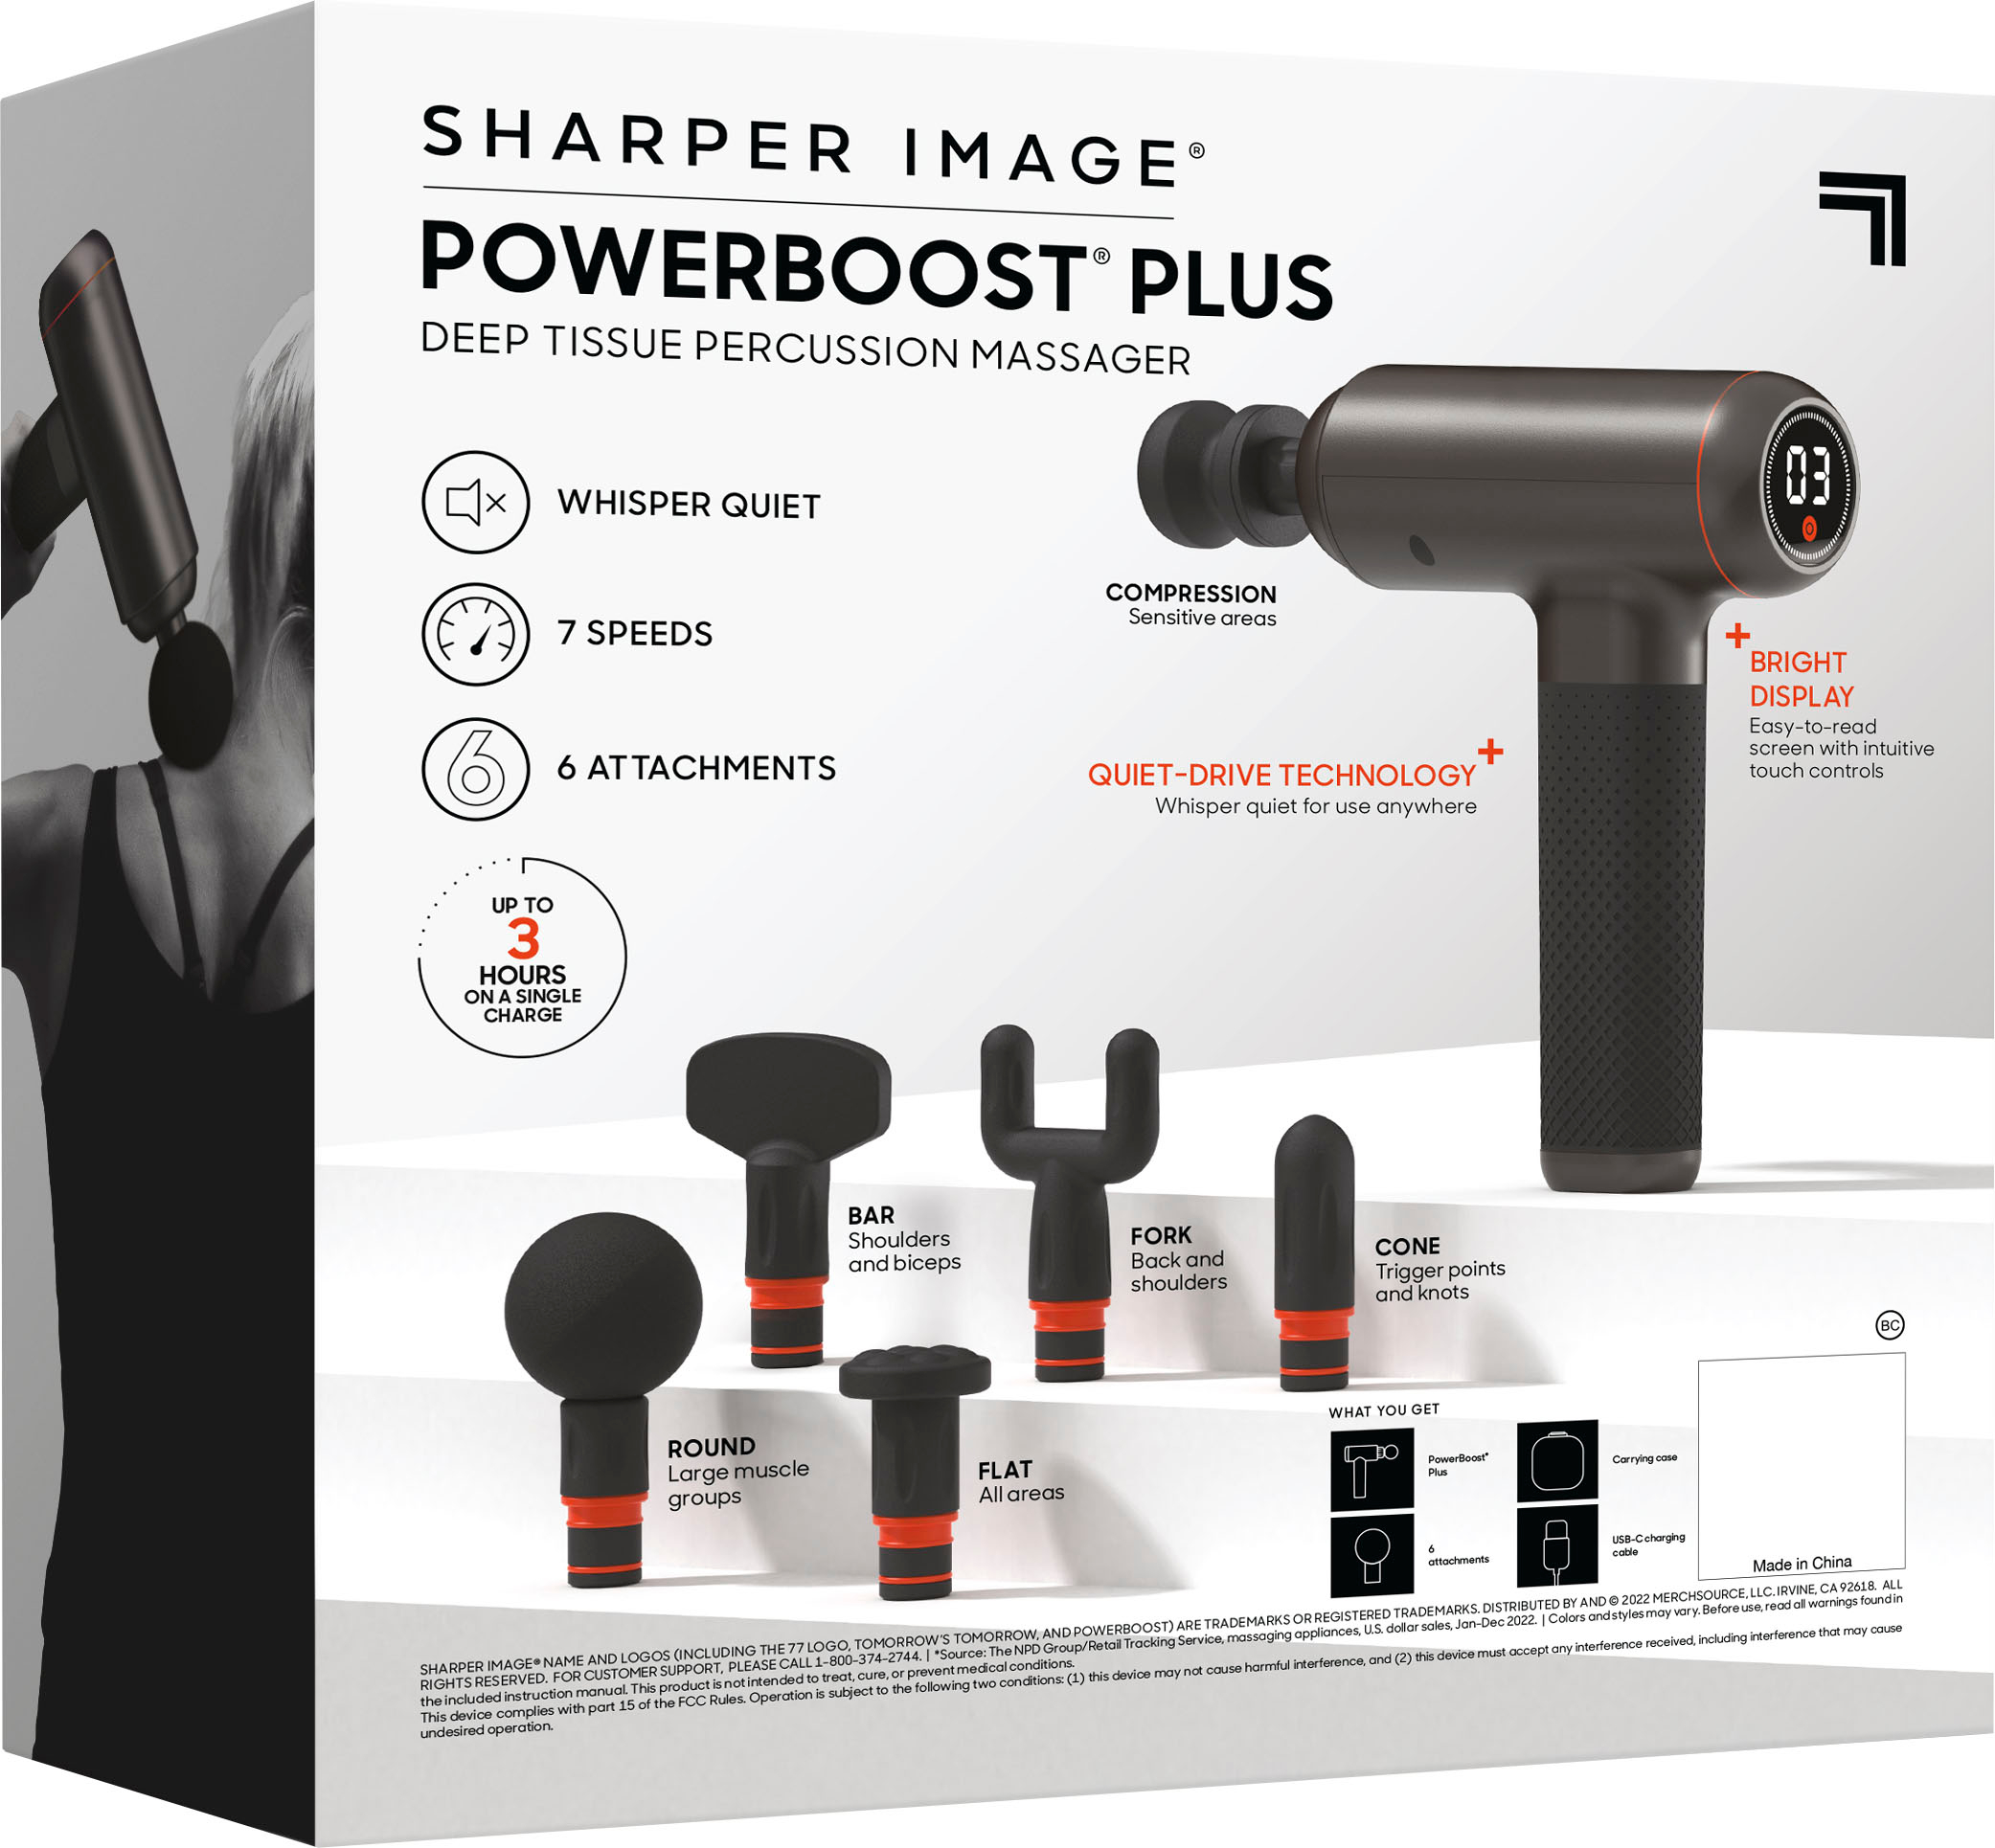 Sharper Image Powerboost Pro Body Massager with Hot and Cold